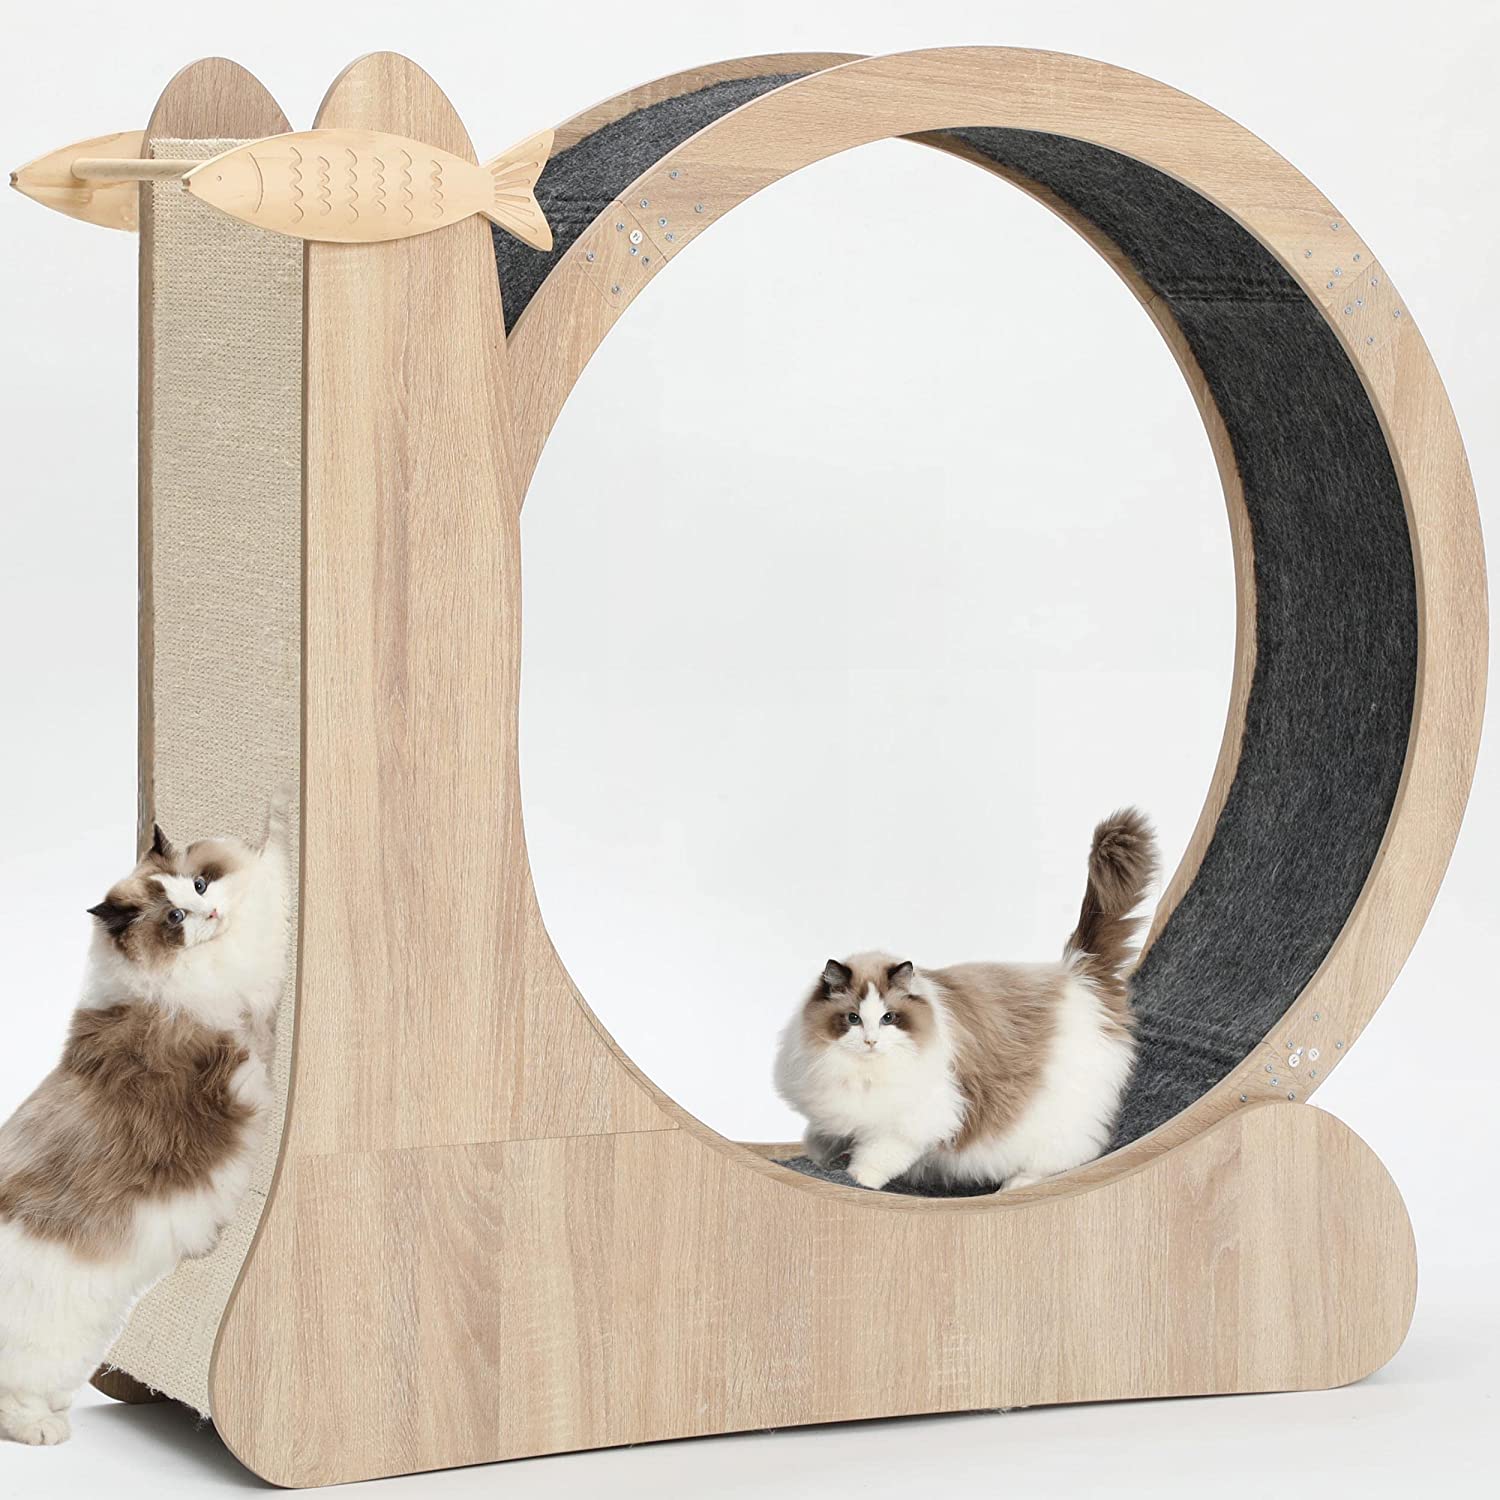 7. CYlively Cat Wheel Exerciser with Cat Scratcher